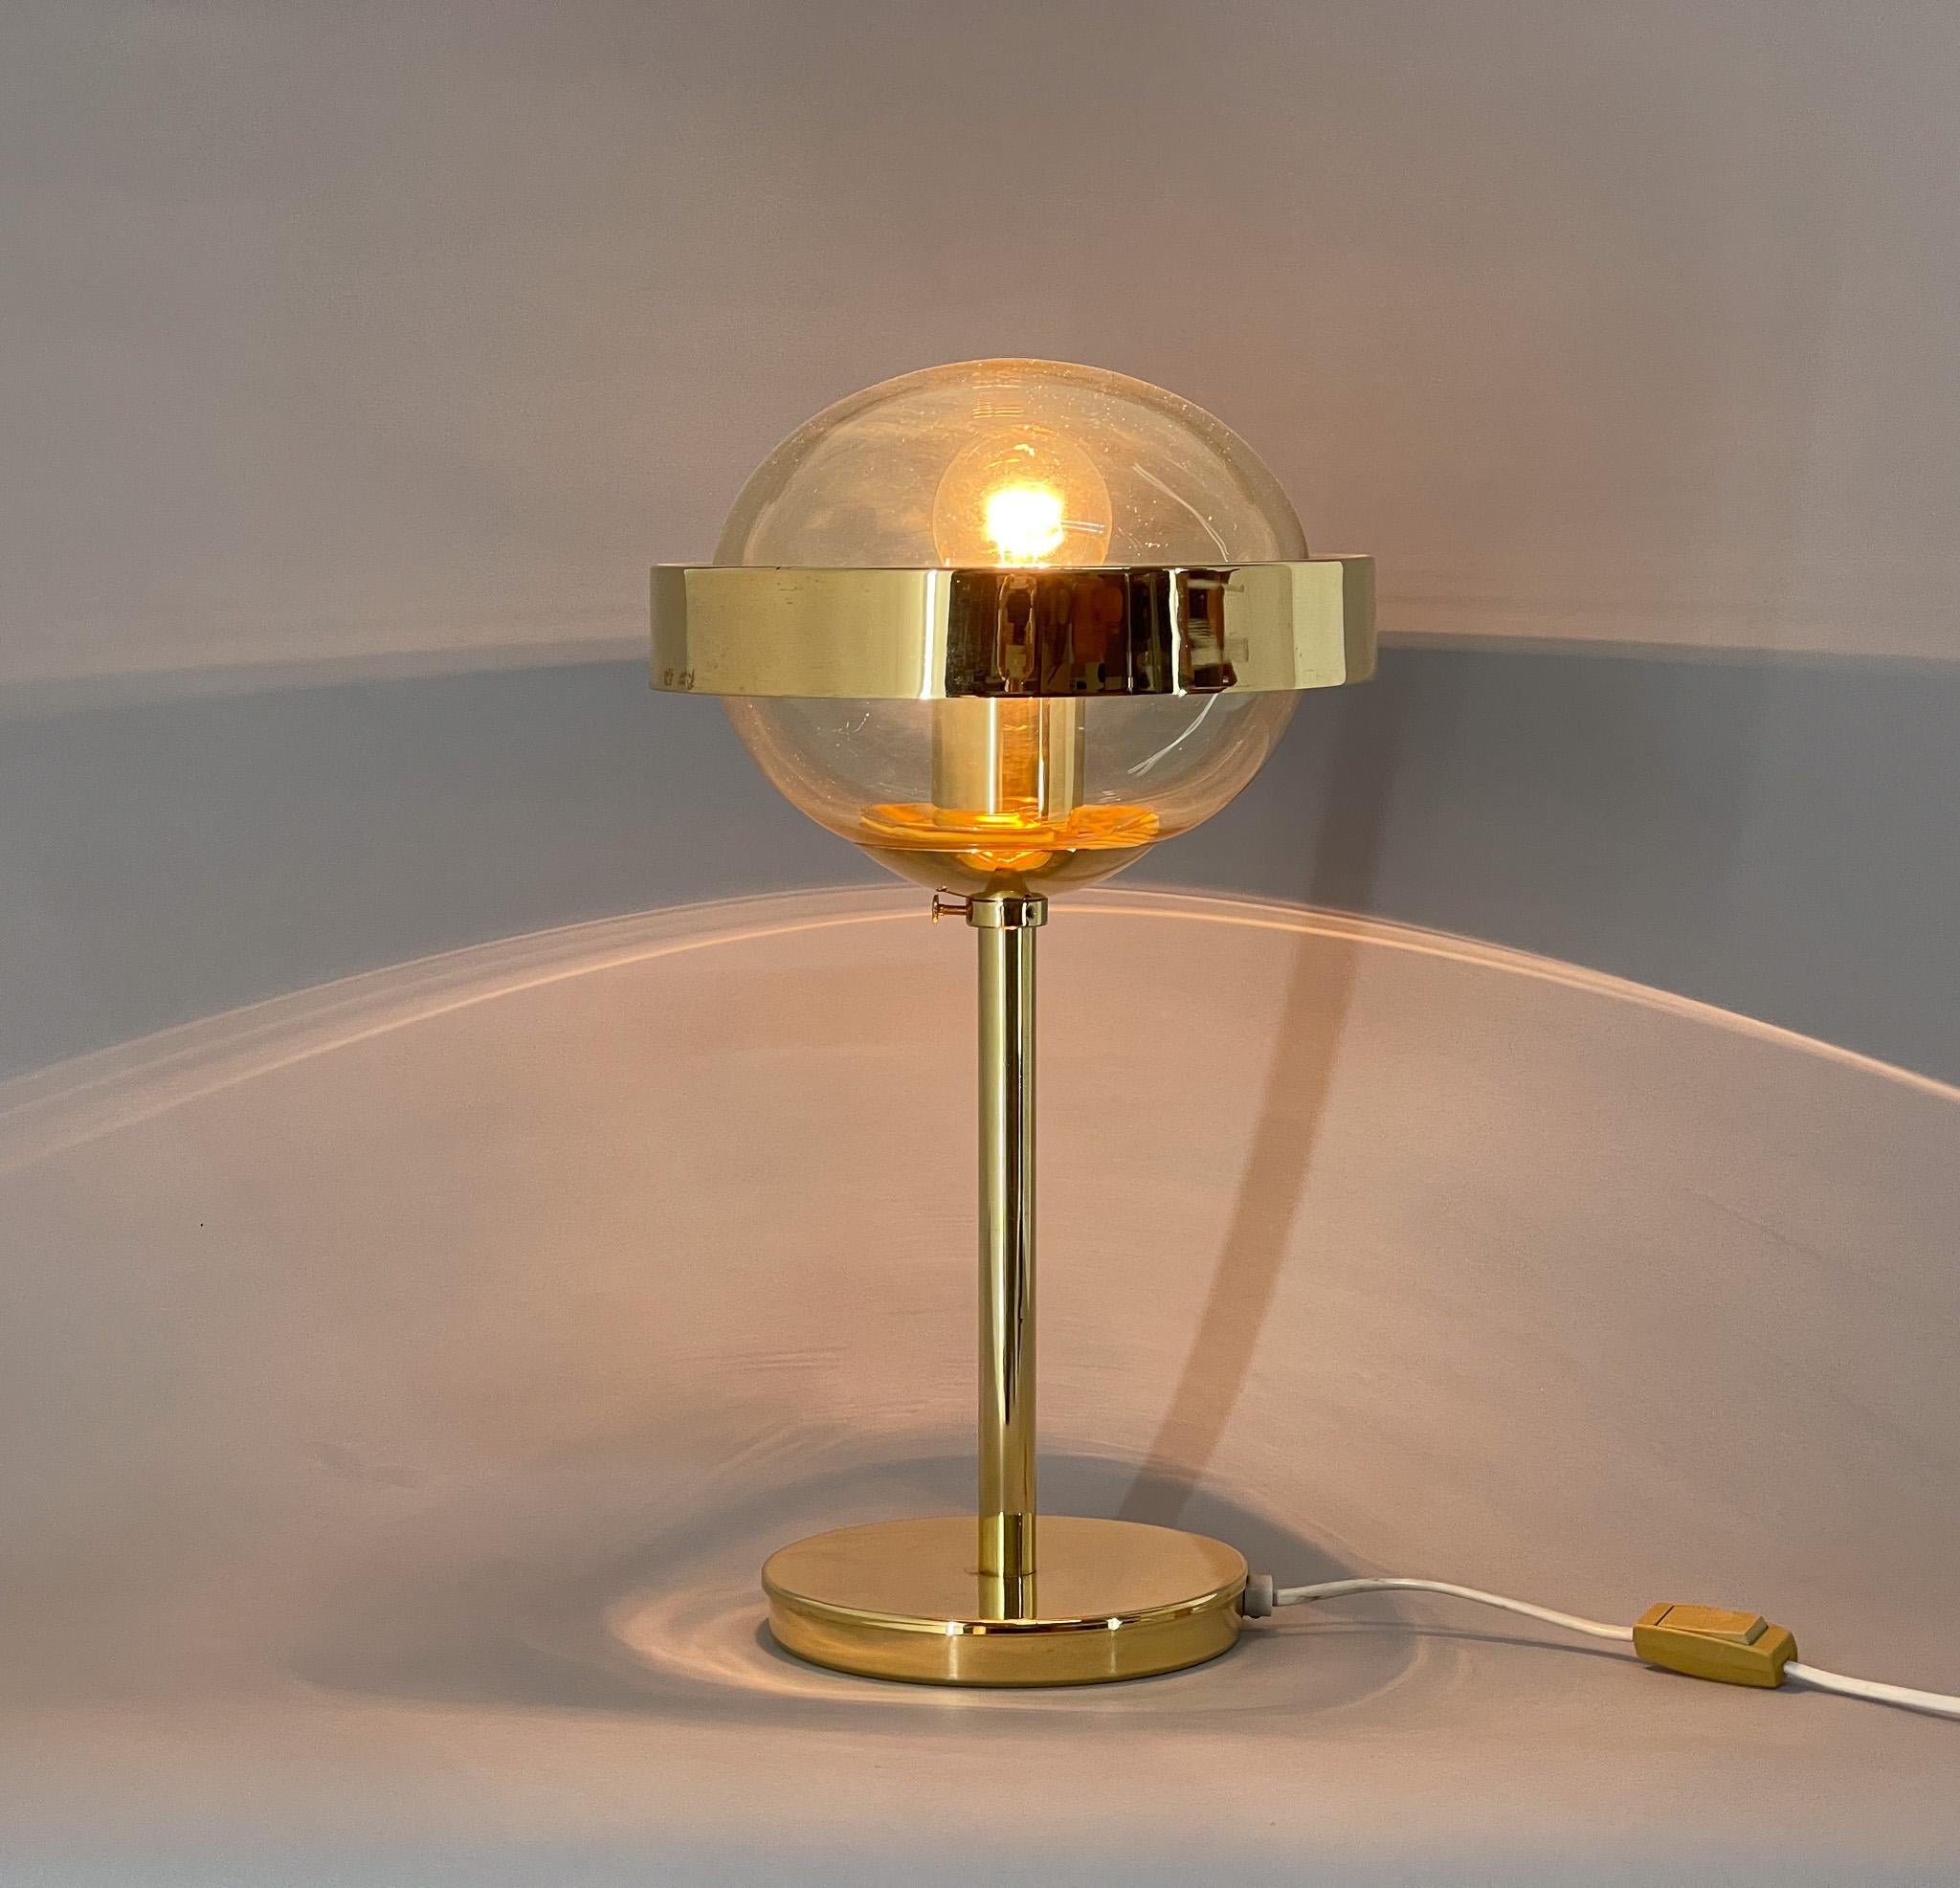 Vintage brass and glass table lamp, produced by famous Kamenicky Senov Glassworks in former Czechoslovakia in the 1960's. 
Bulb: 1x E25-E27. US plug adapter included.